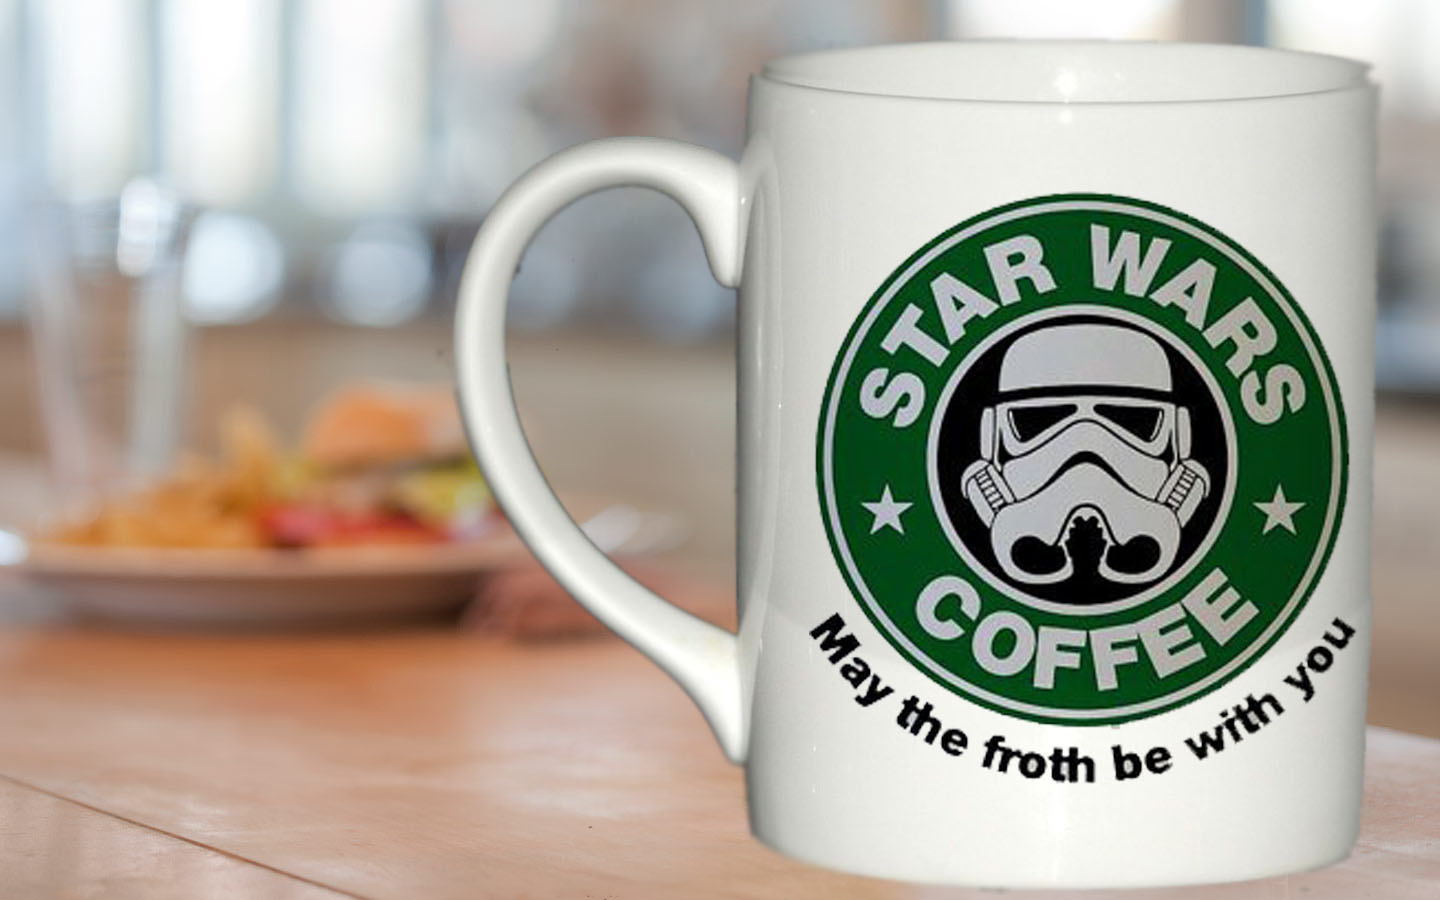 https://www.teesfashionstyle.com/wp-content/uploads/2016/07/Gift-custom-mug-Star-Wars-Coffee-custom-cup-for-family-and-friends.jpg